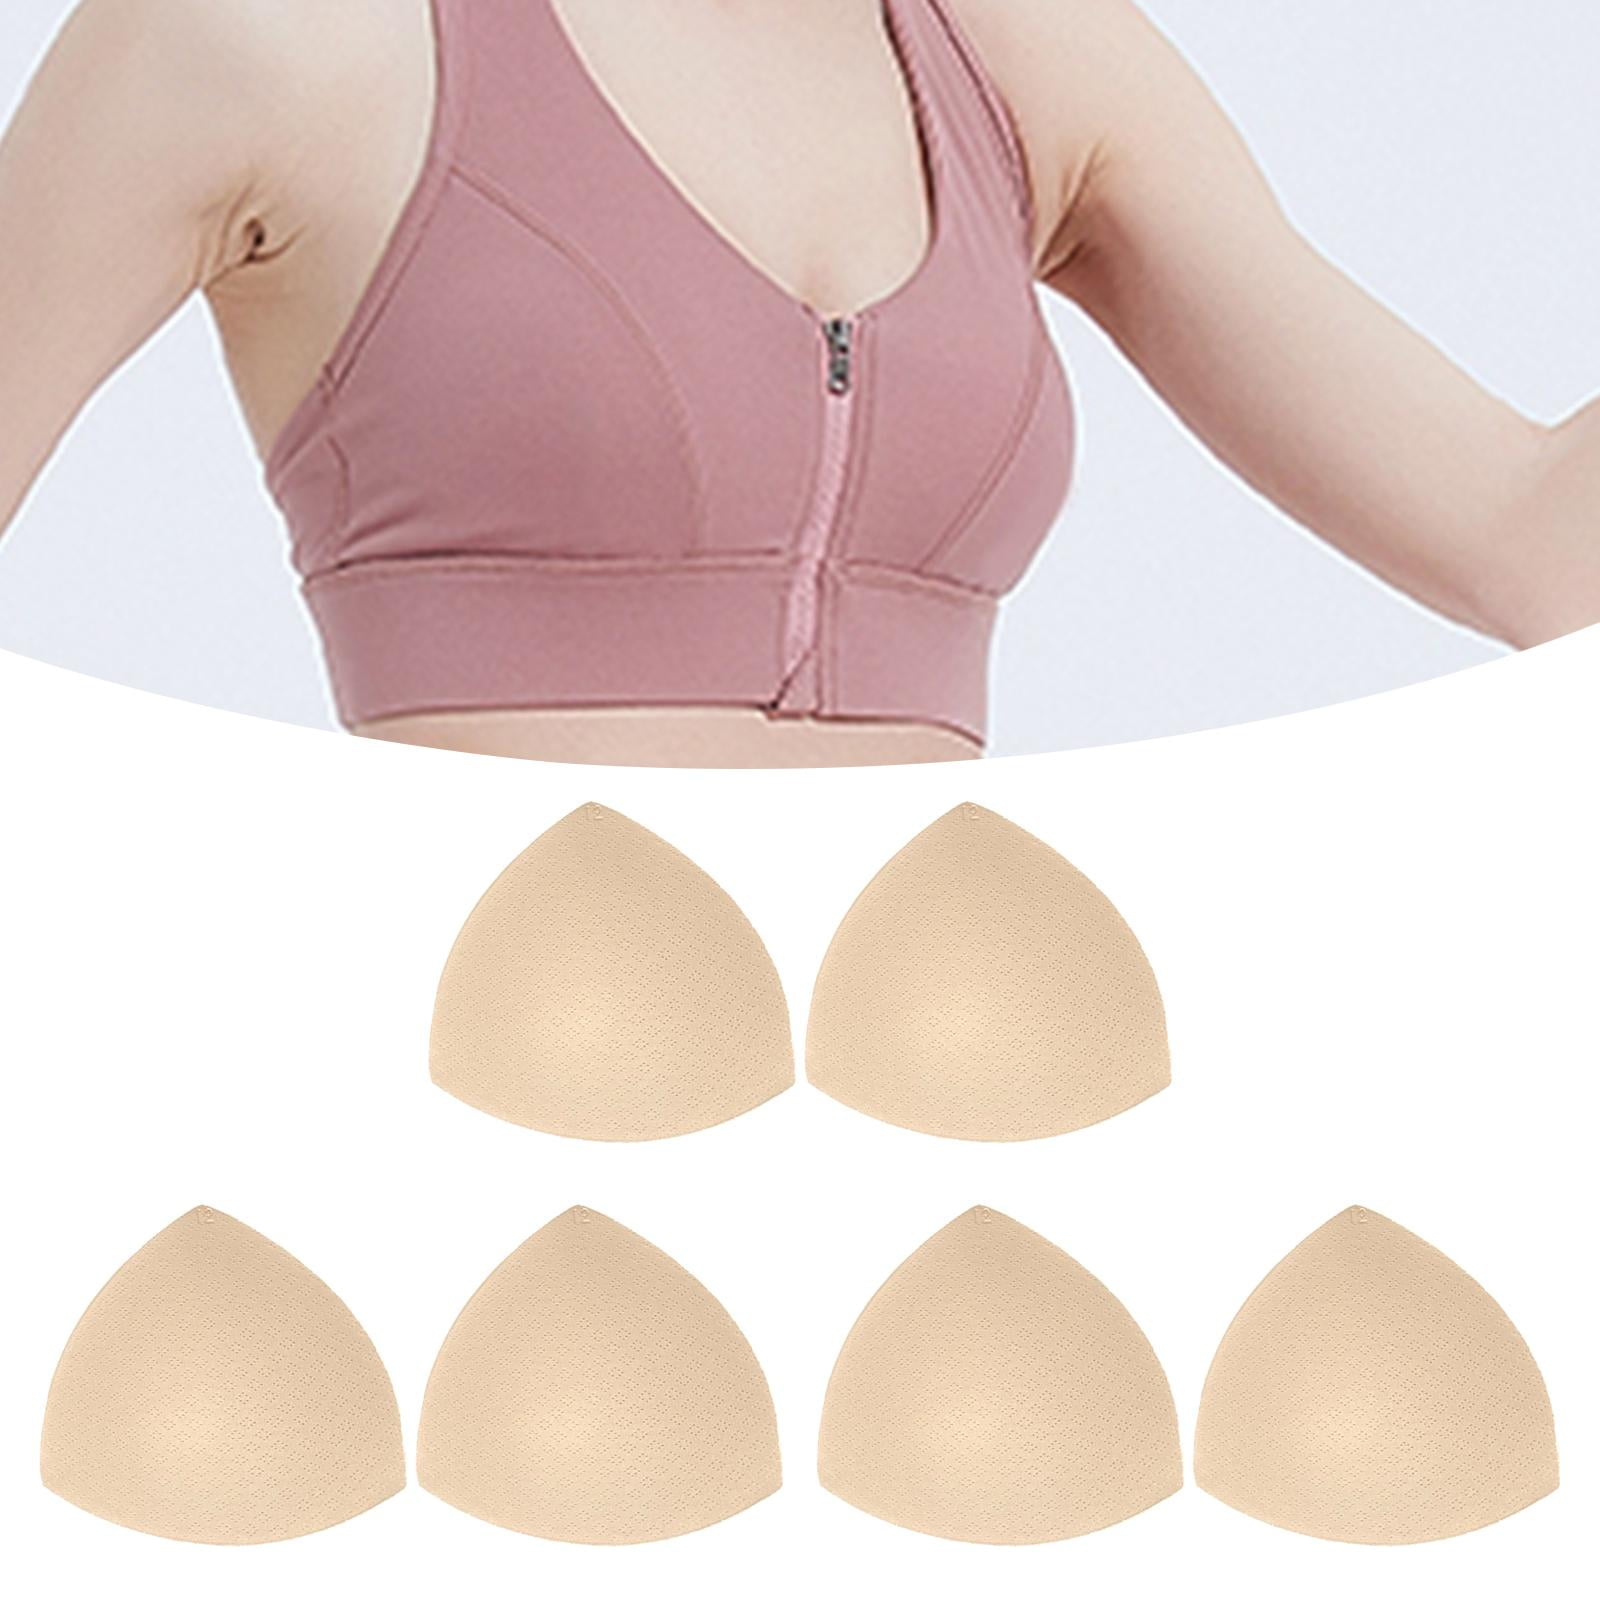 3 Pairs Bra Pads Inserts, Push up Breathable Triangle Women Foam Bra Insert  for Sports Swimsuit Repments Cup Skin Color 